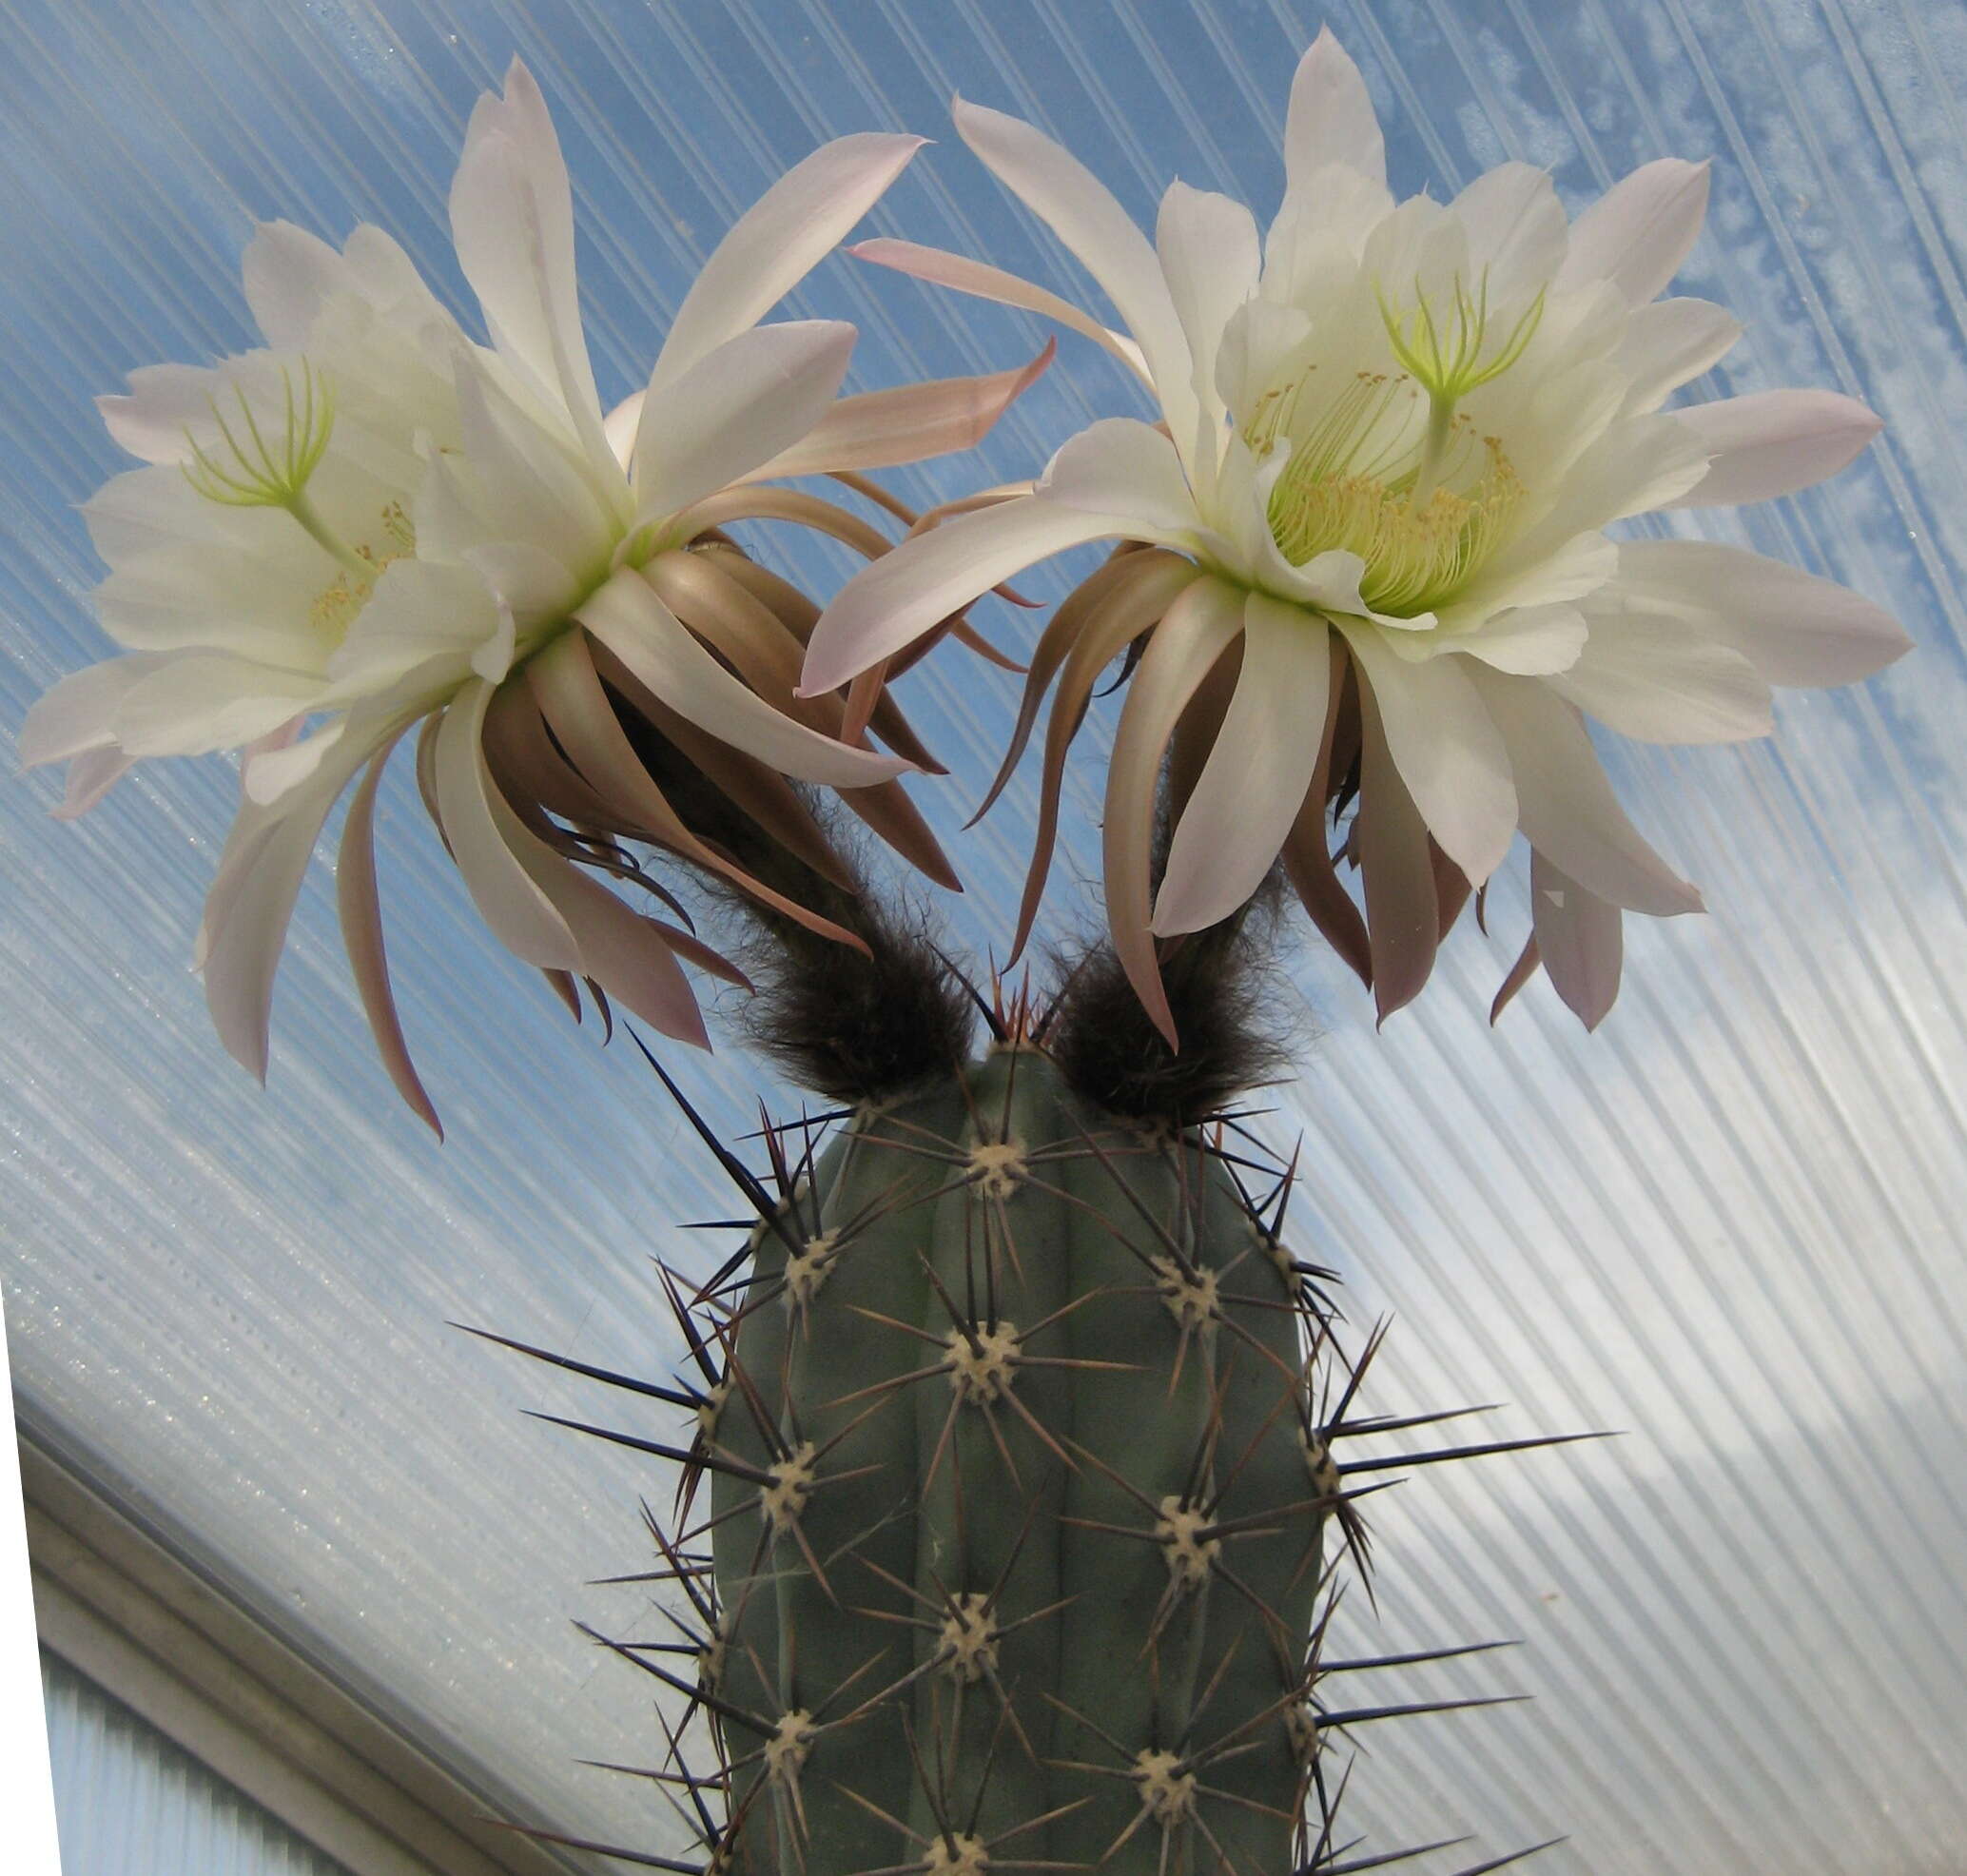 Image of Echinopsis tacaquirensis (Vaupel) H. Friedrich & G. D. Rowley